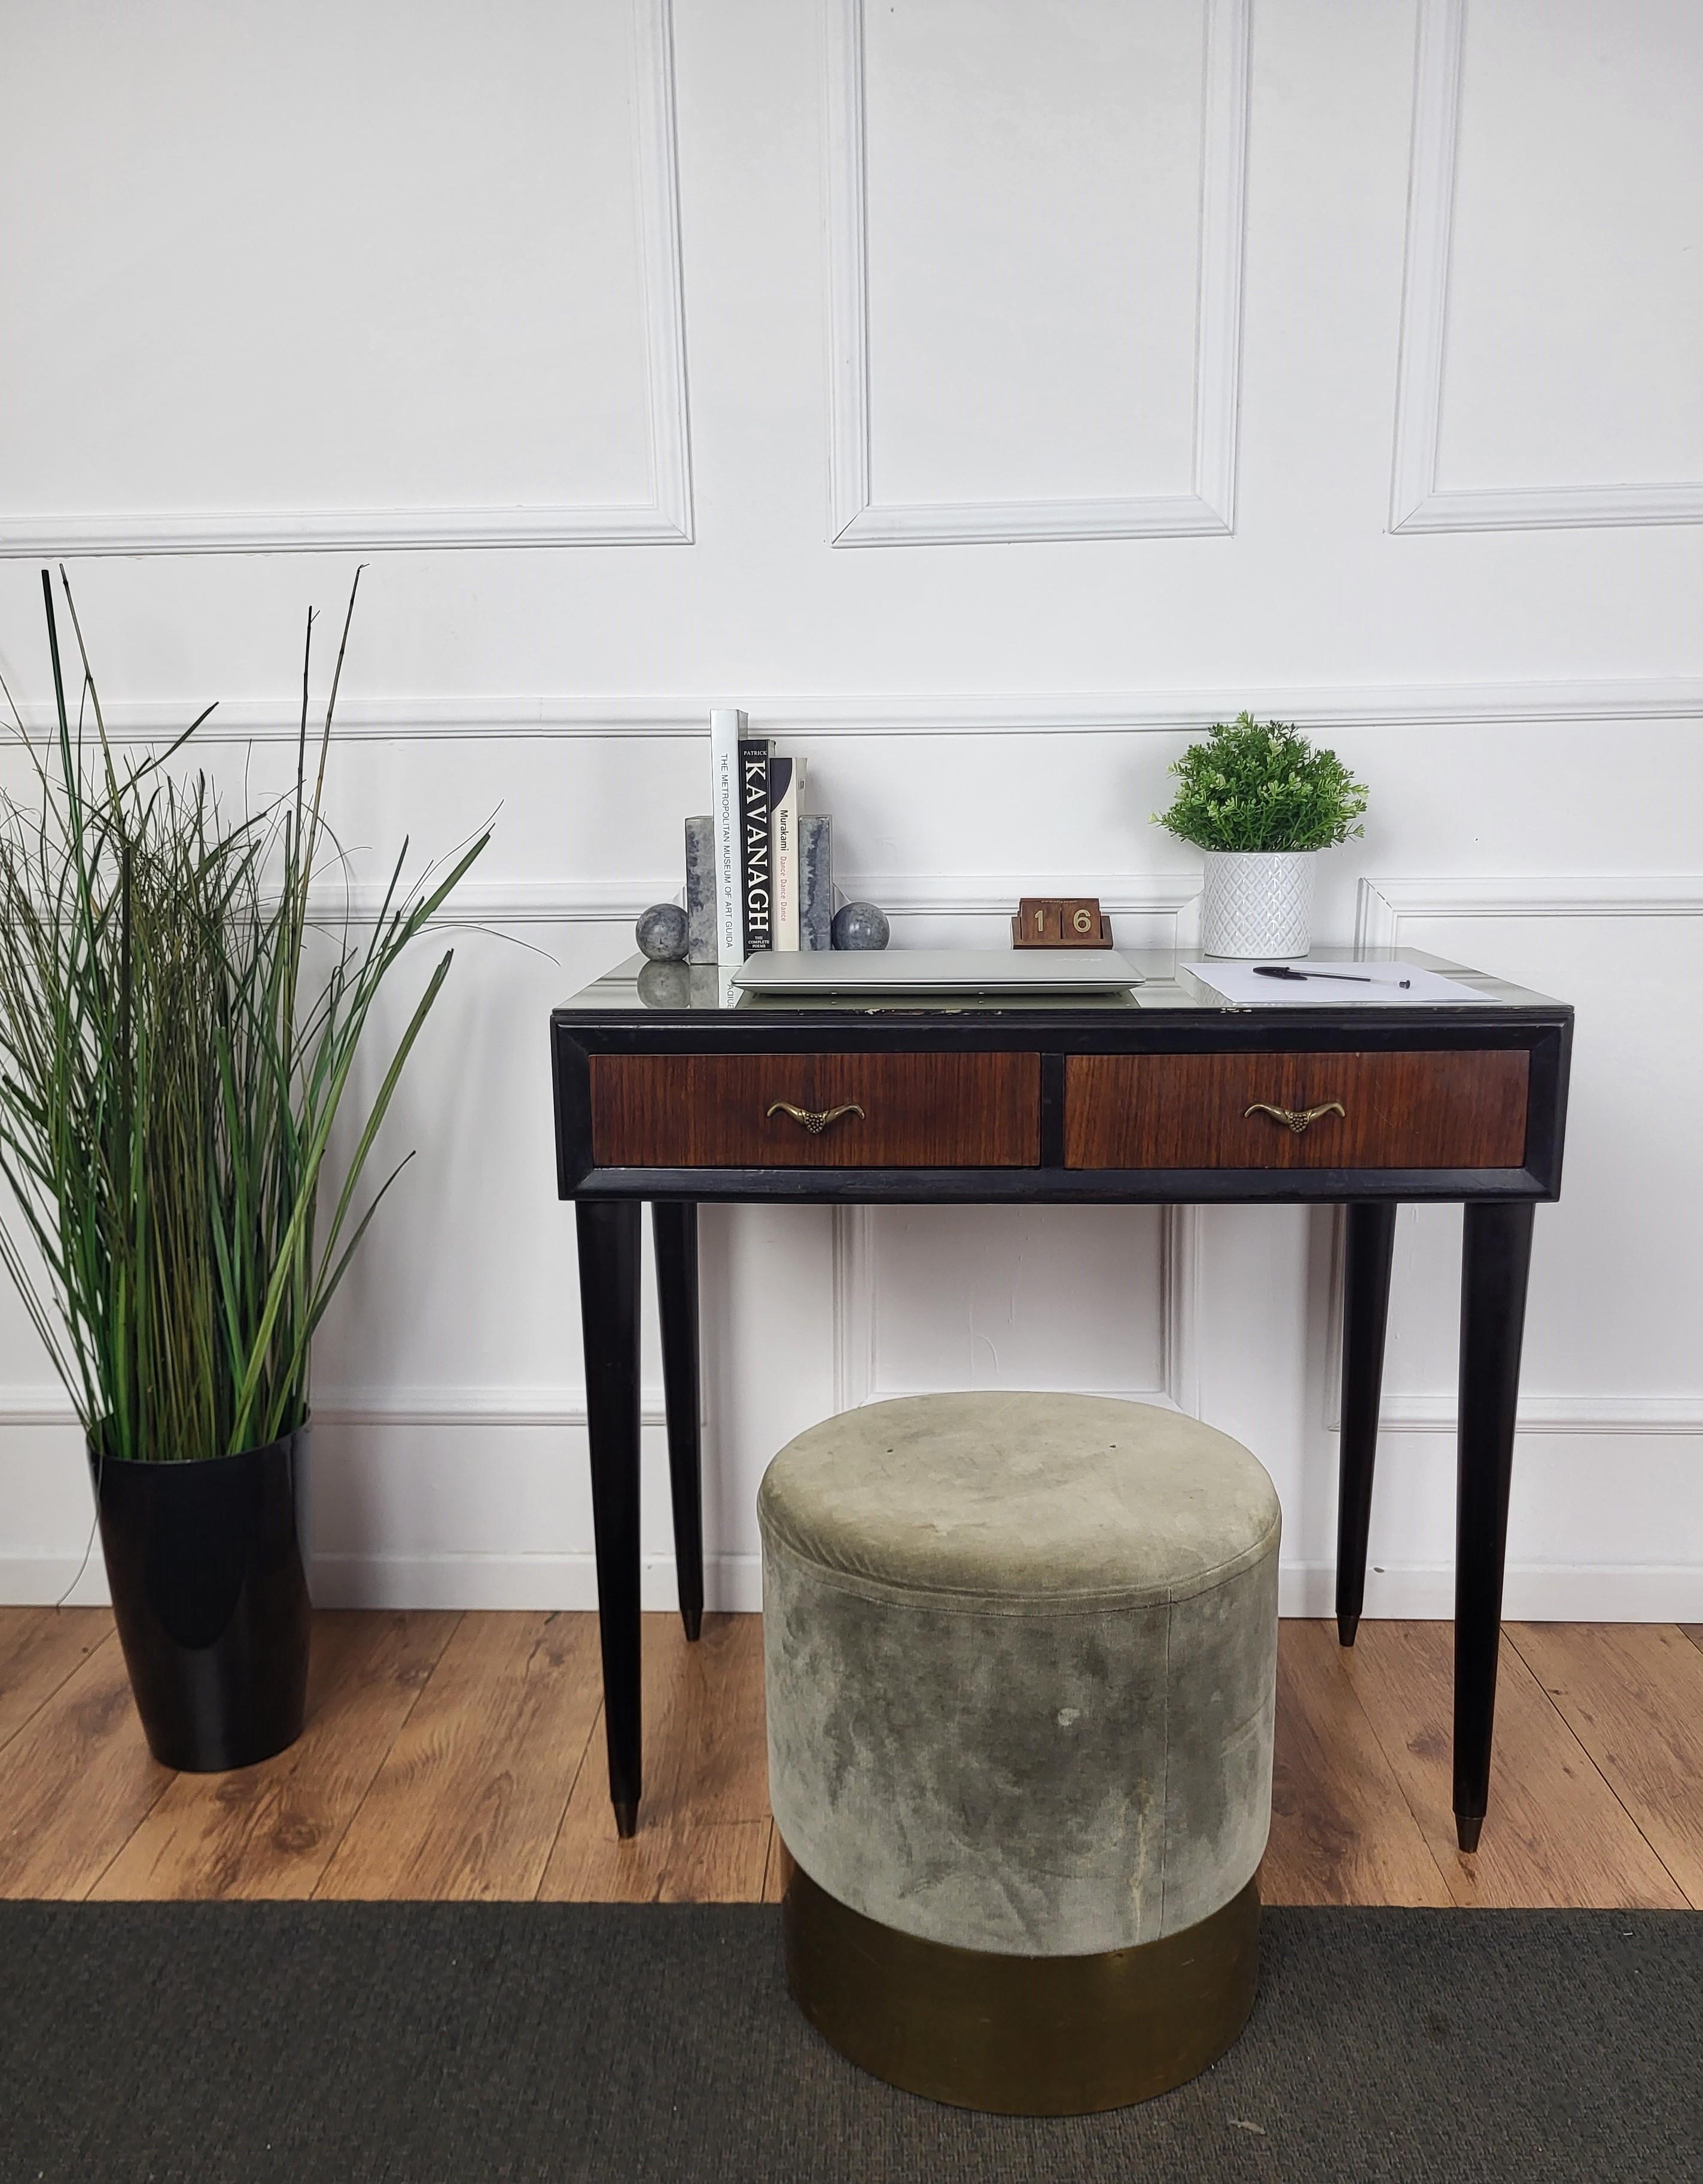 Very elegant Italian Mid-Century Modern small desk or writing table with stylish legs and veneer wood with two drawers. This beautiful piece is completed by the glass top and the brass drawers handles. Ideal in any room as a small stand alone corner